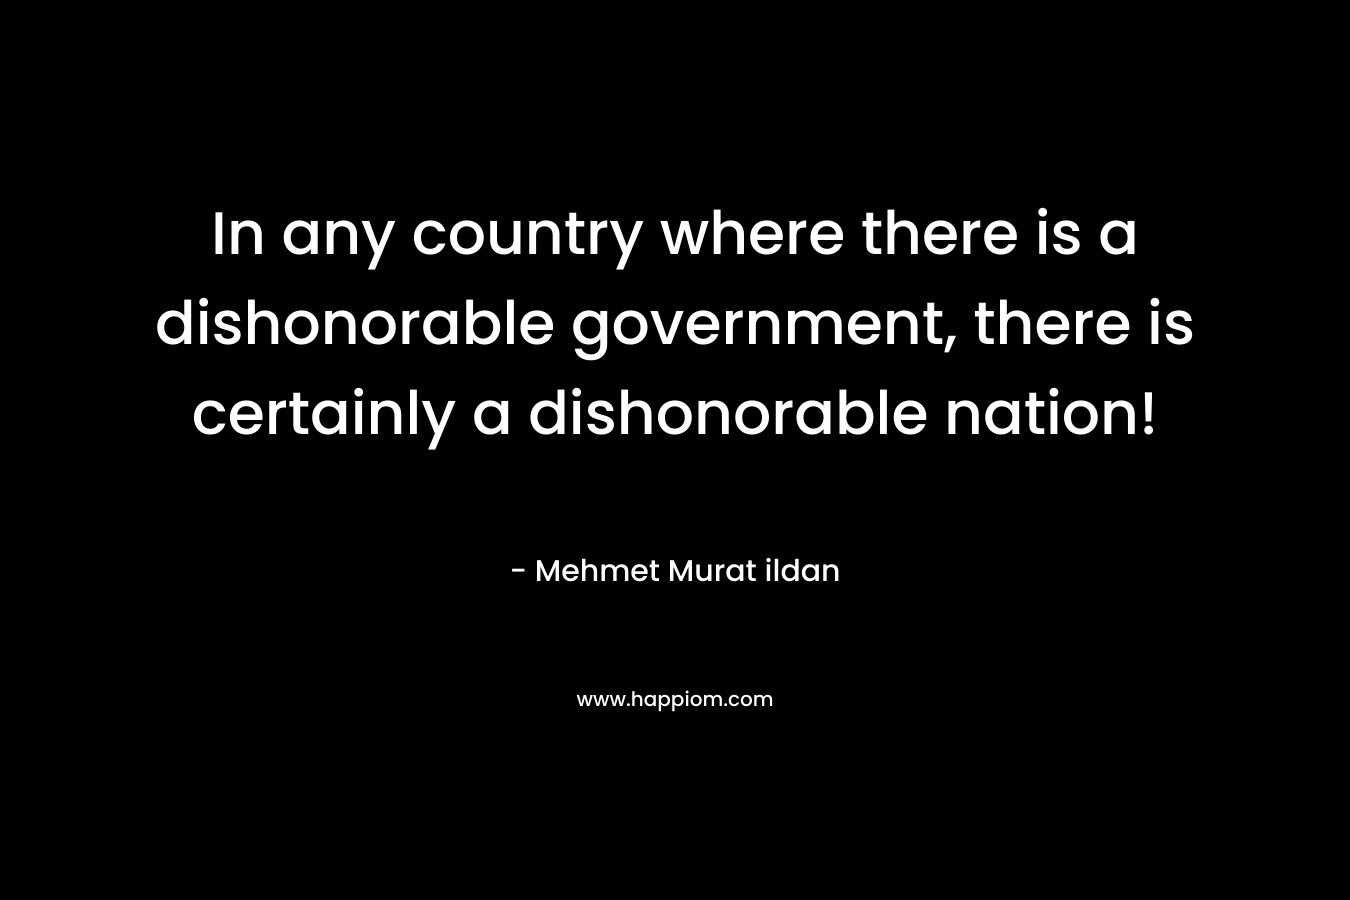 In any country where there is a dishonorable government, there is certainly a dishonorable nation!